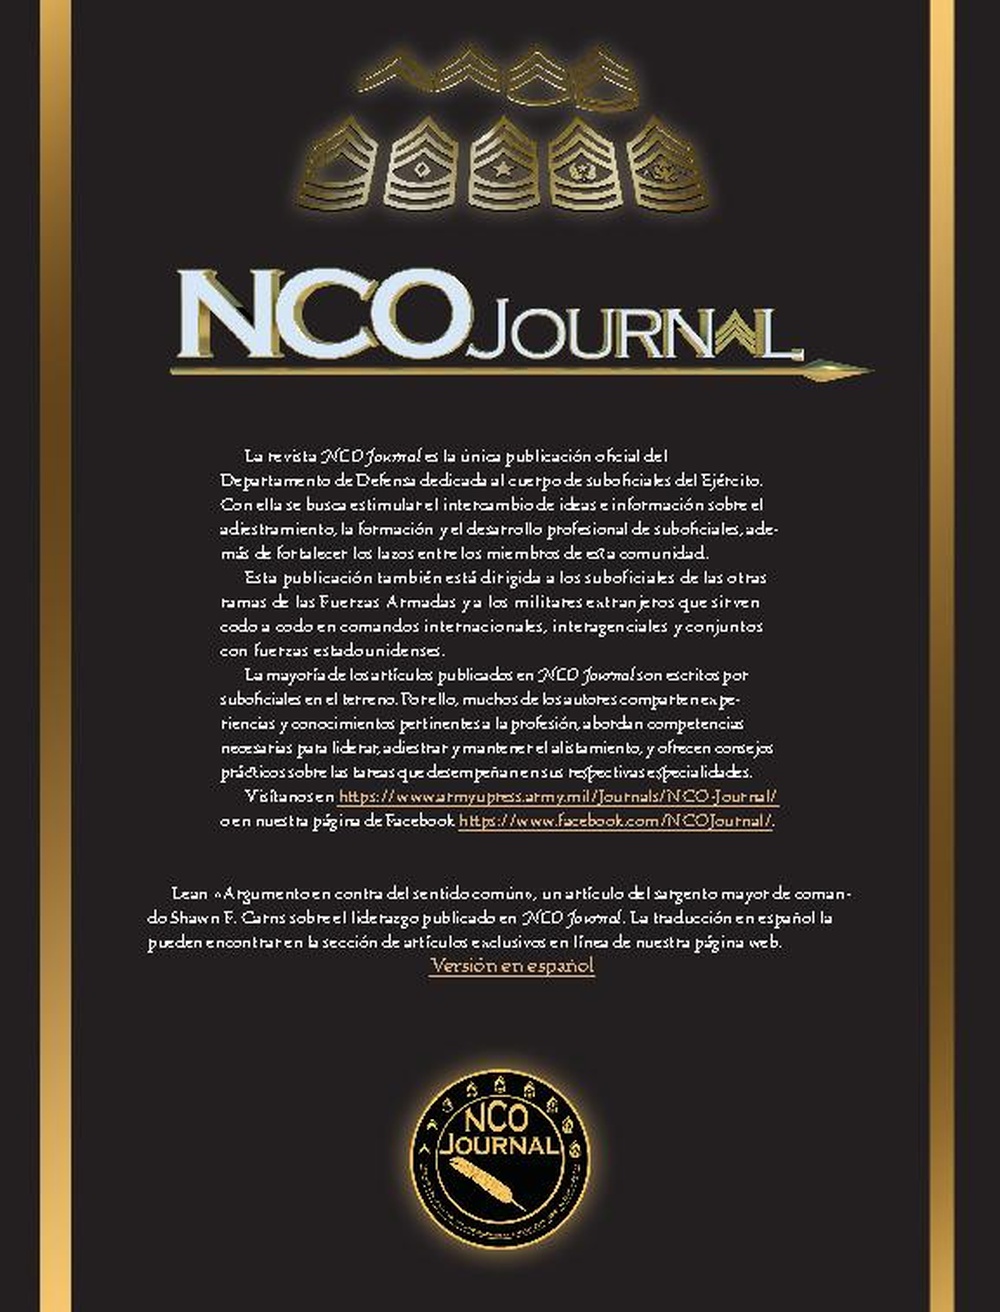 Military Review Hispano-American 3rd Quarter 2019 NCO Journal Information - Back Cover